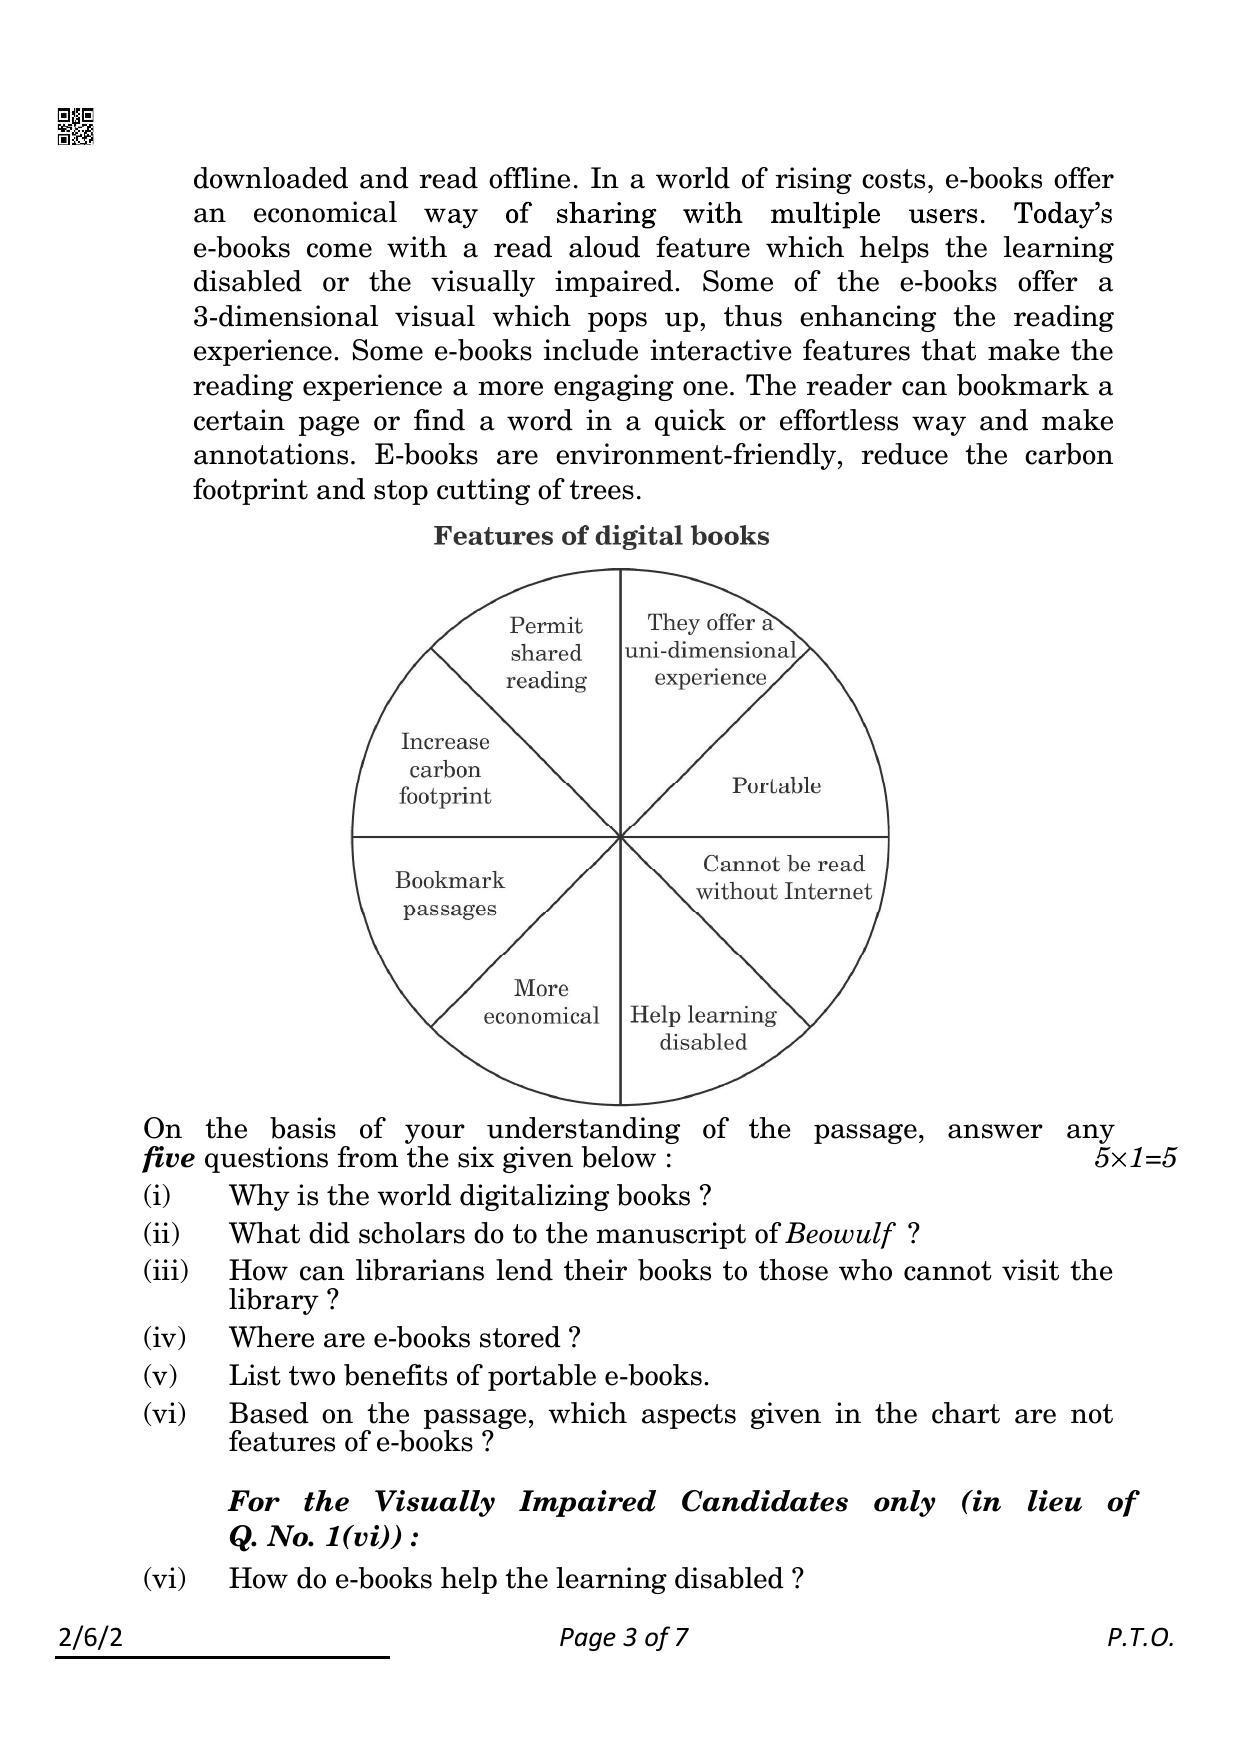 CBSE Class 10 2-6-2_English Language And Literature 2022 Compartment Question Paper - Page 3